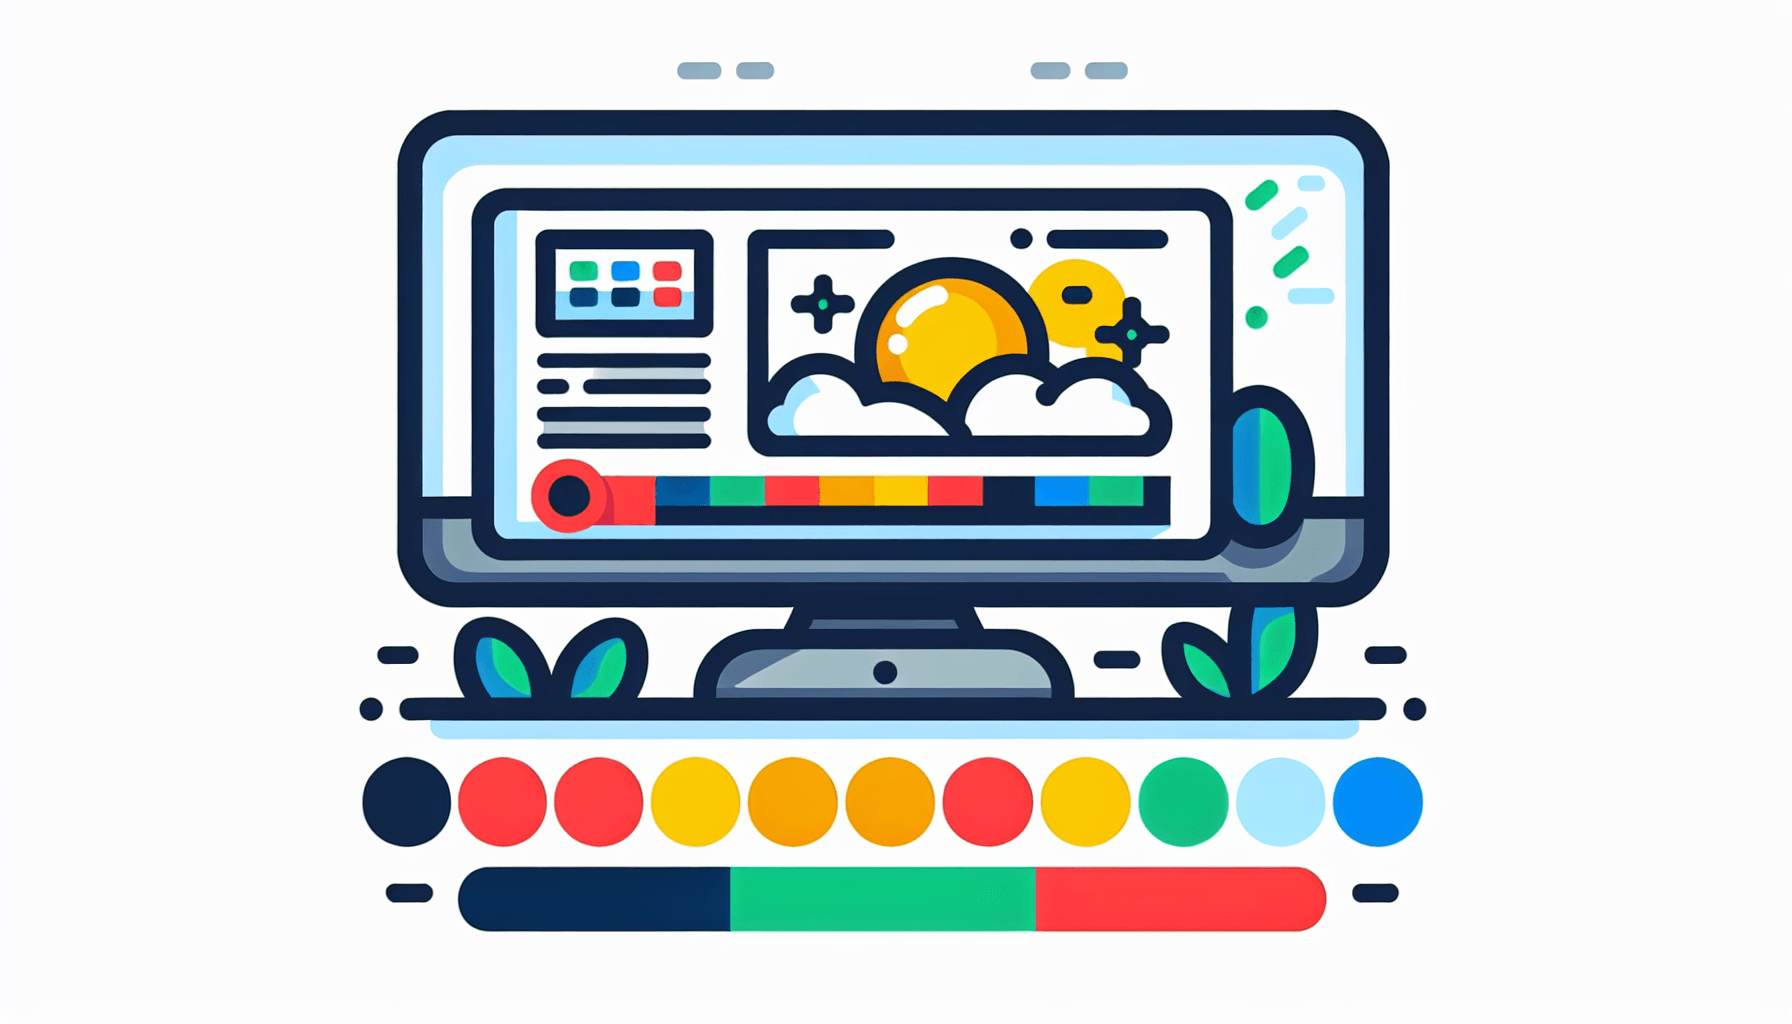 Computer in flat illustration style and white background, red #f47574, green #88c7a8, yellow #fcc44b, and blue #645bc8 colors.